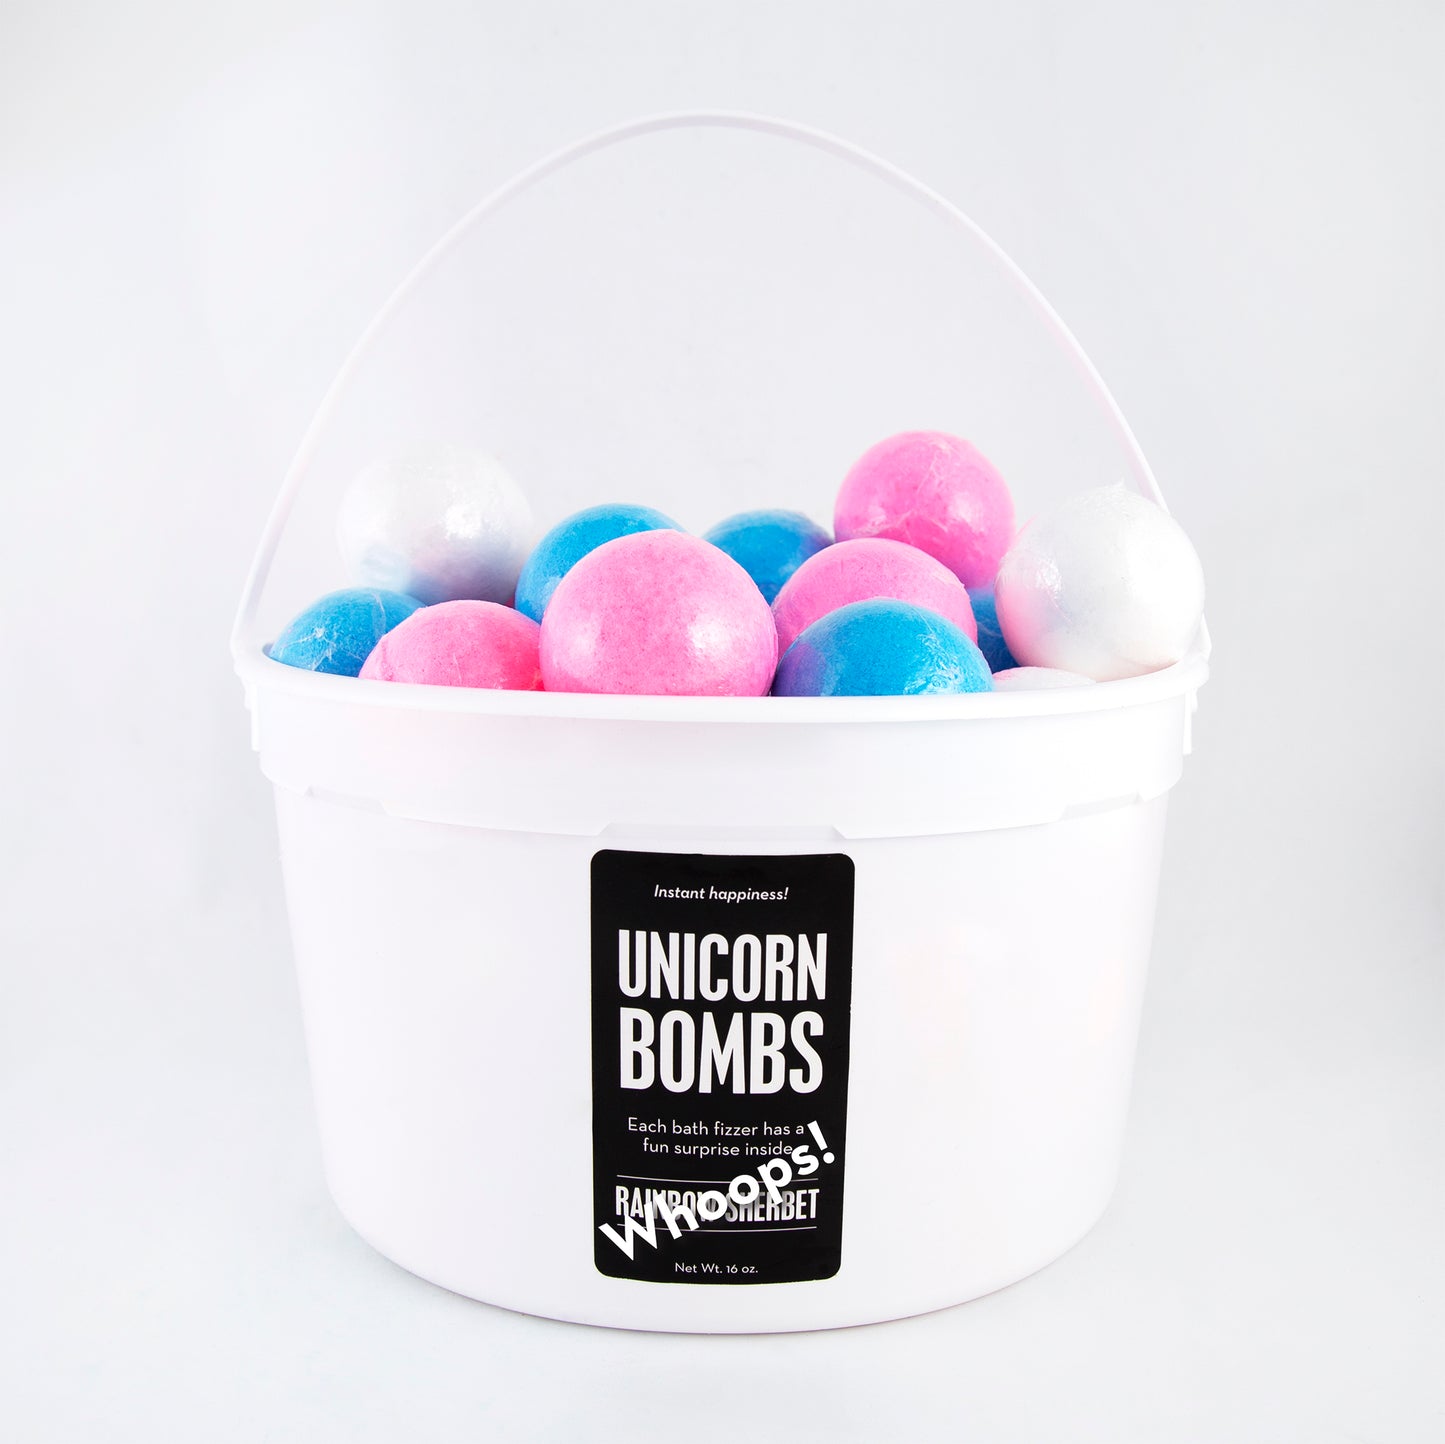 Unicorn bombs whoops pail!